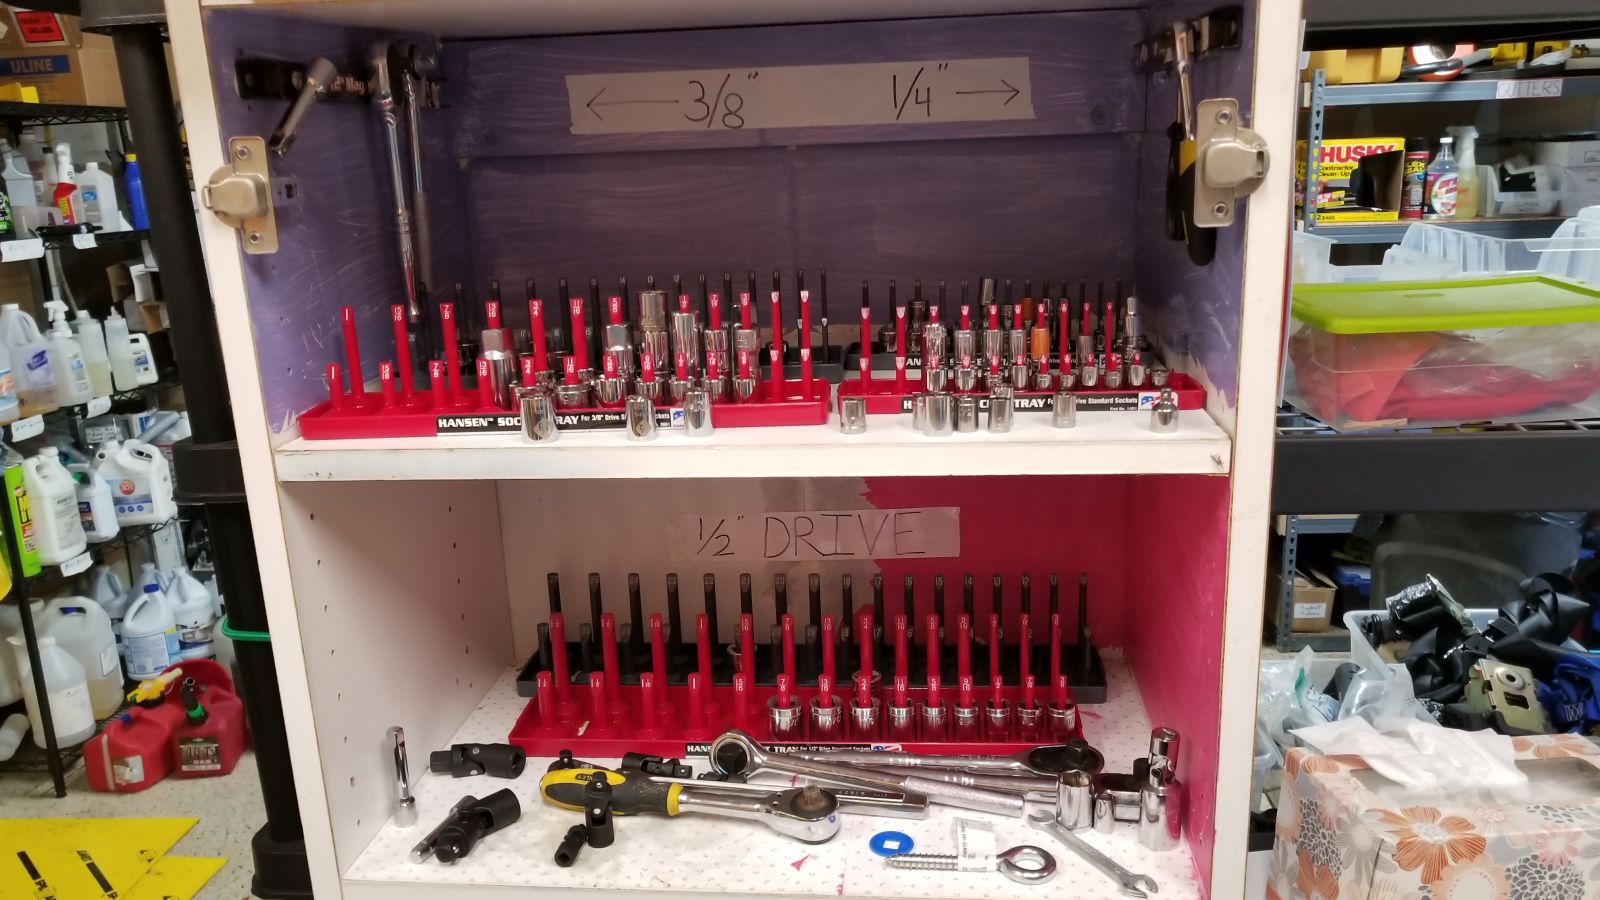 Prior to this setup there were 9 different socket sets, all of which were missing 60% of the sockets. And the socket sets were allllll over the place. Now they have a spot and life is good. 